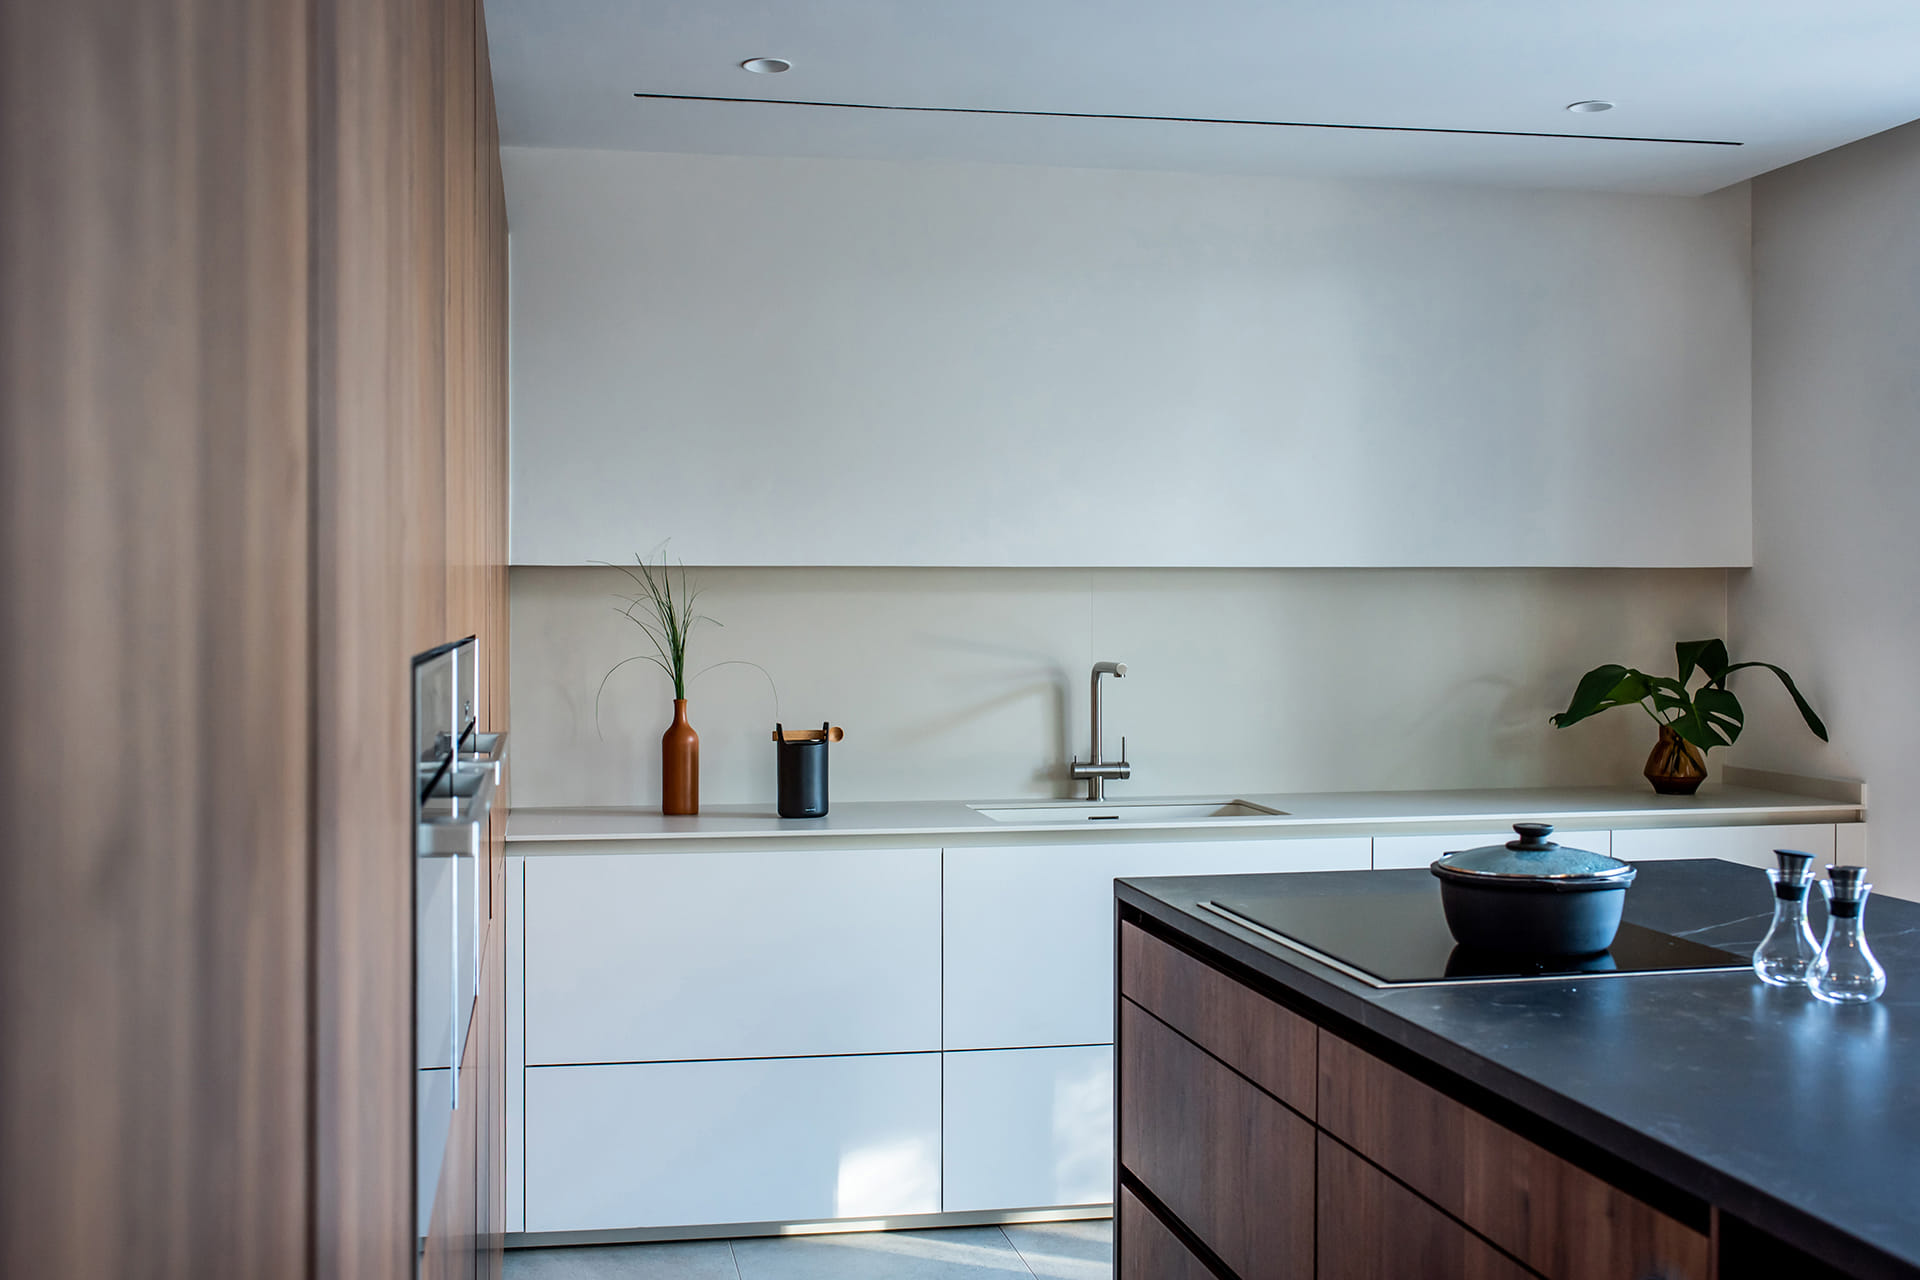 Santos white kitchen furniture in an L-shaped layout